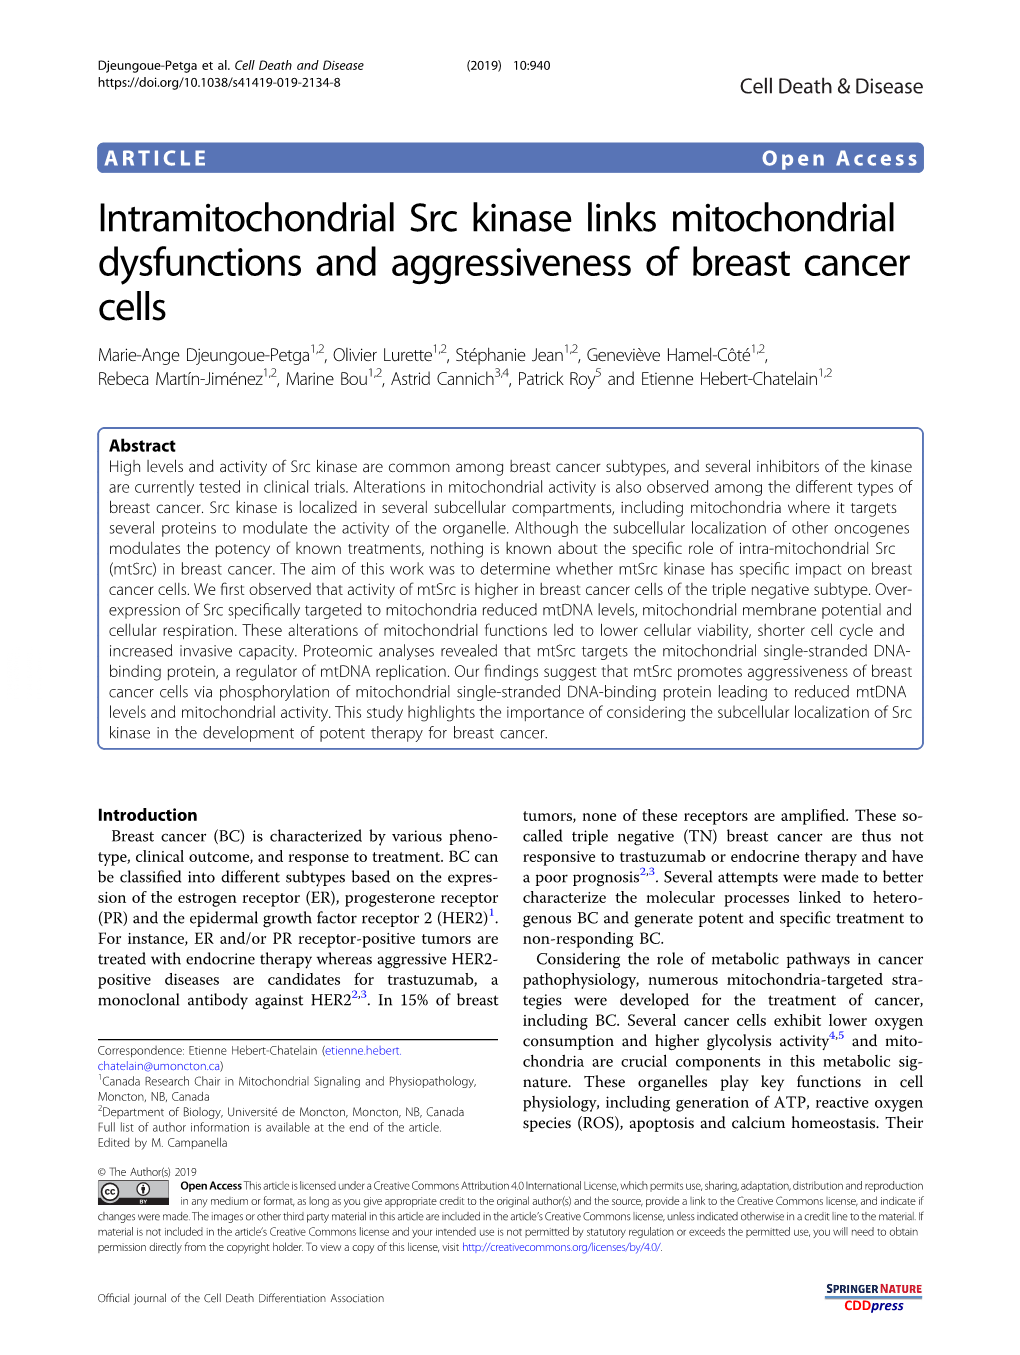 Intramitochondrial Src Kinase Links Mitochondrial Dysfunctions And